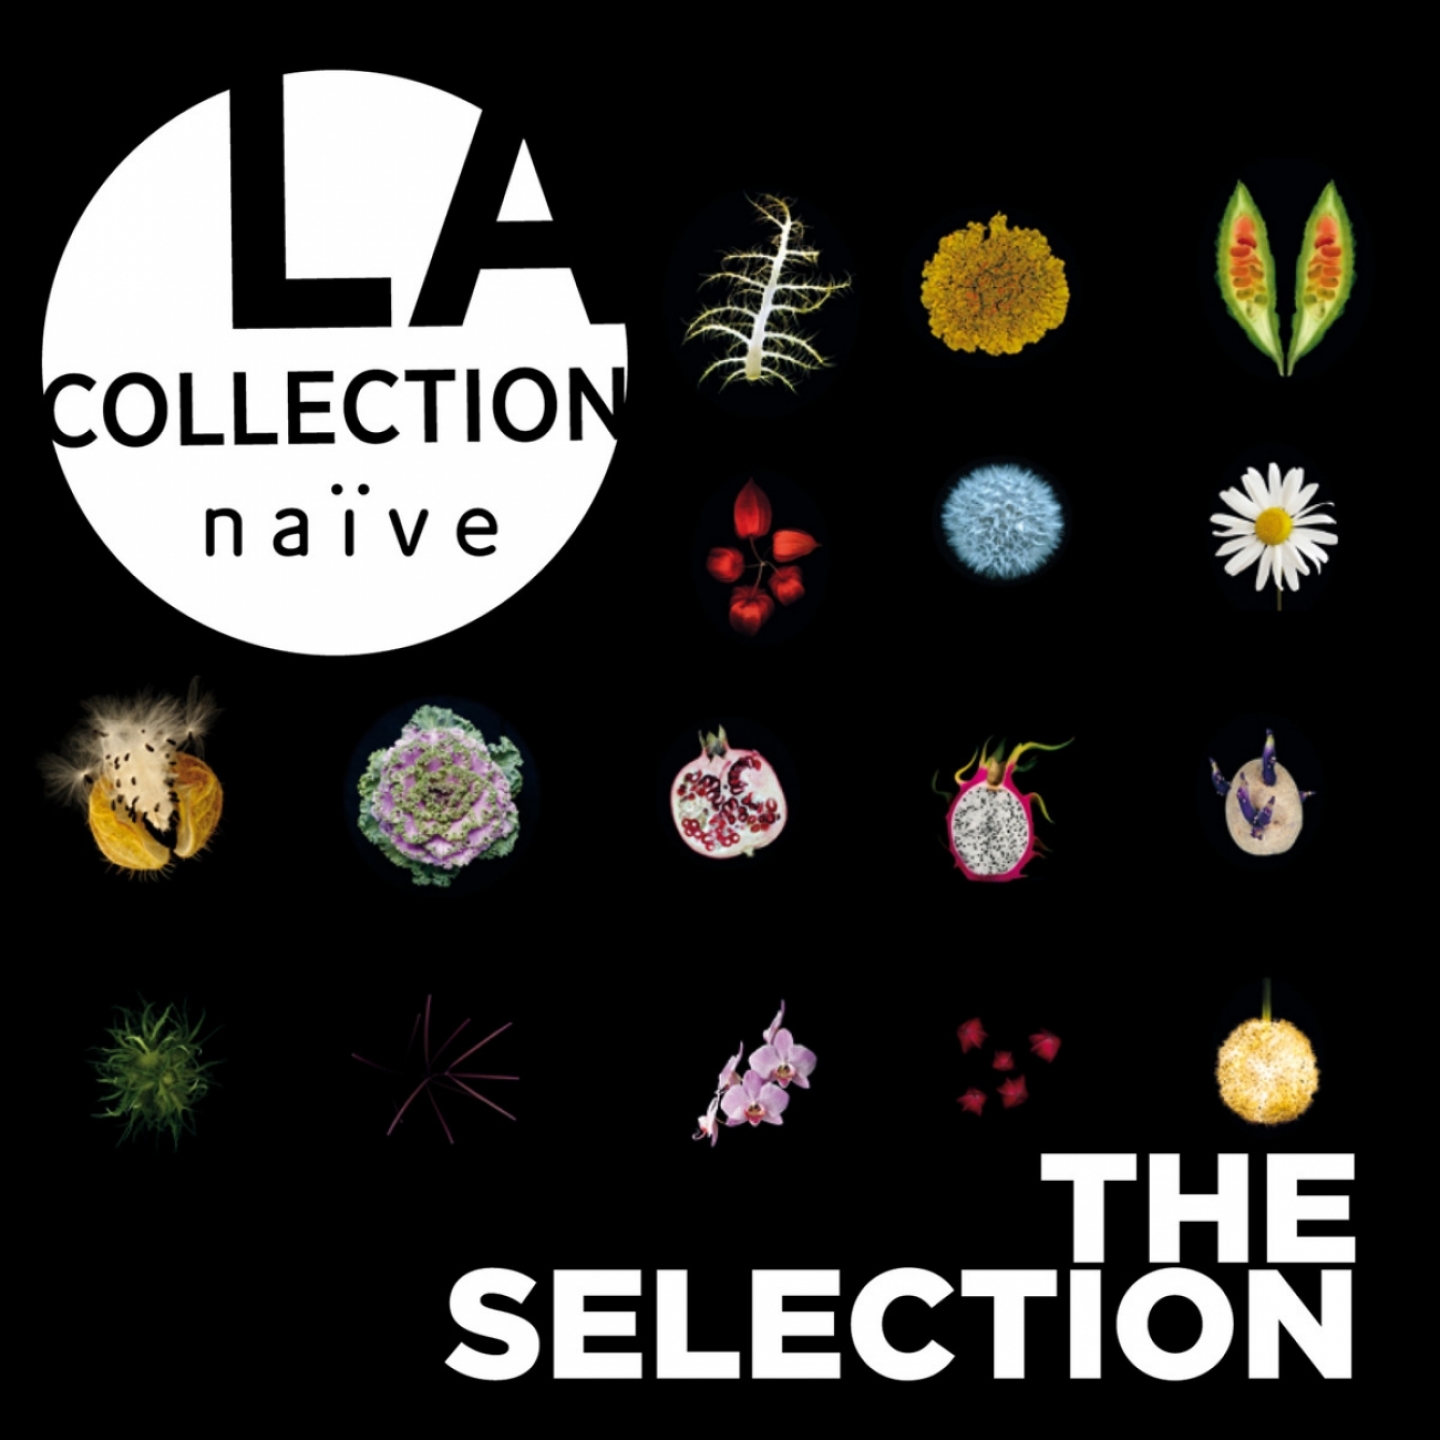 La collection na ve: The Selection